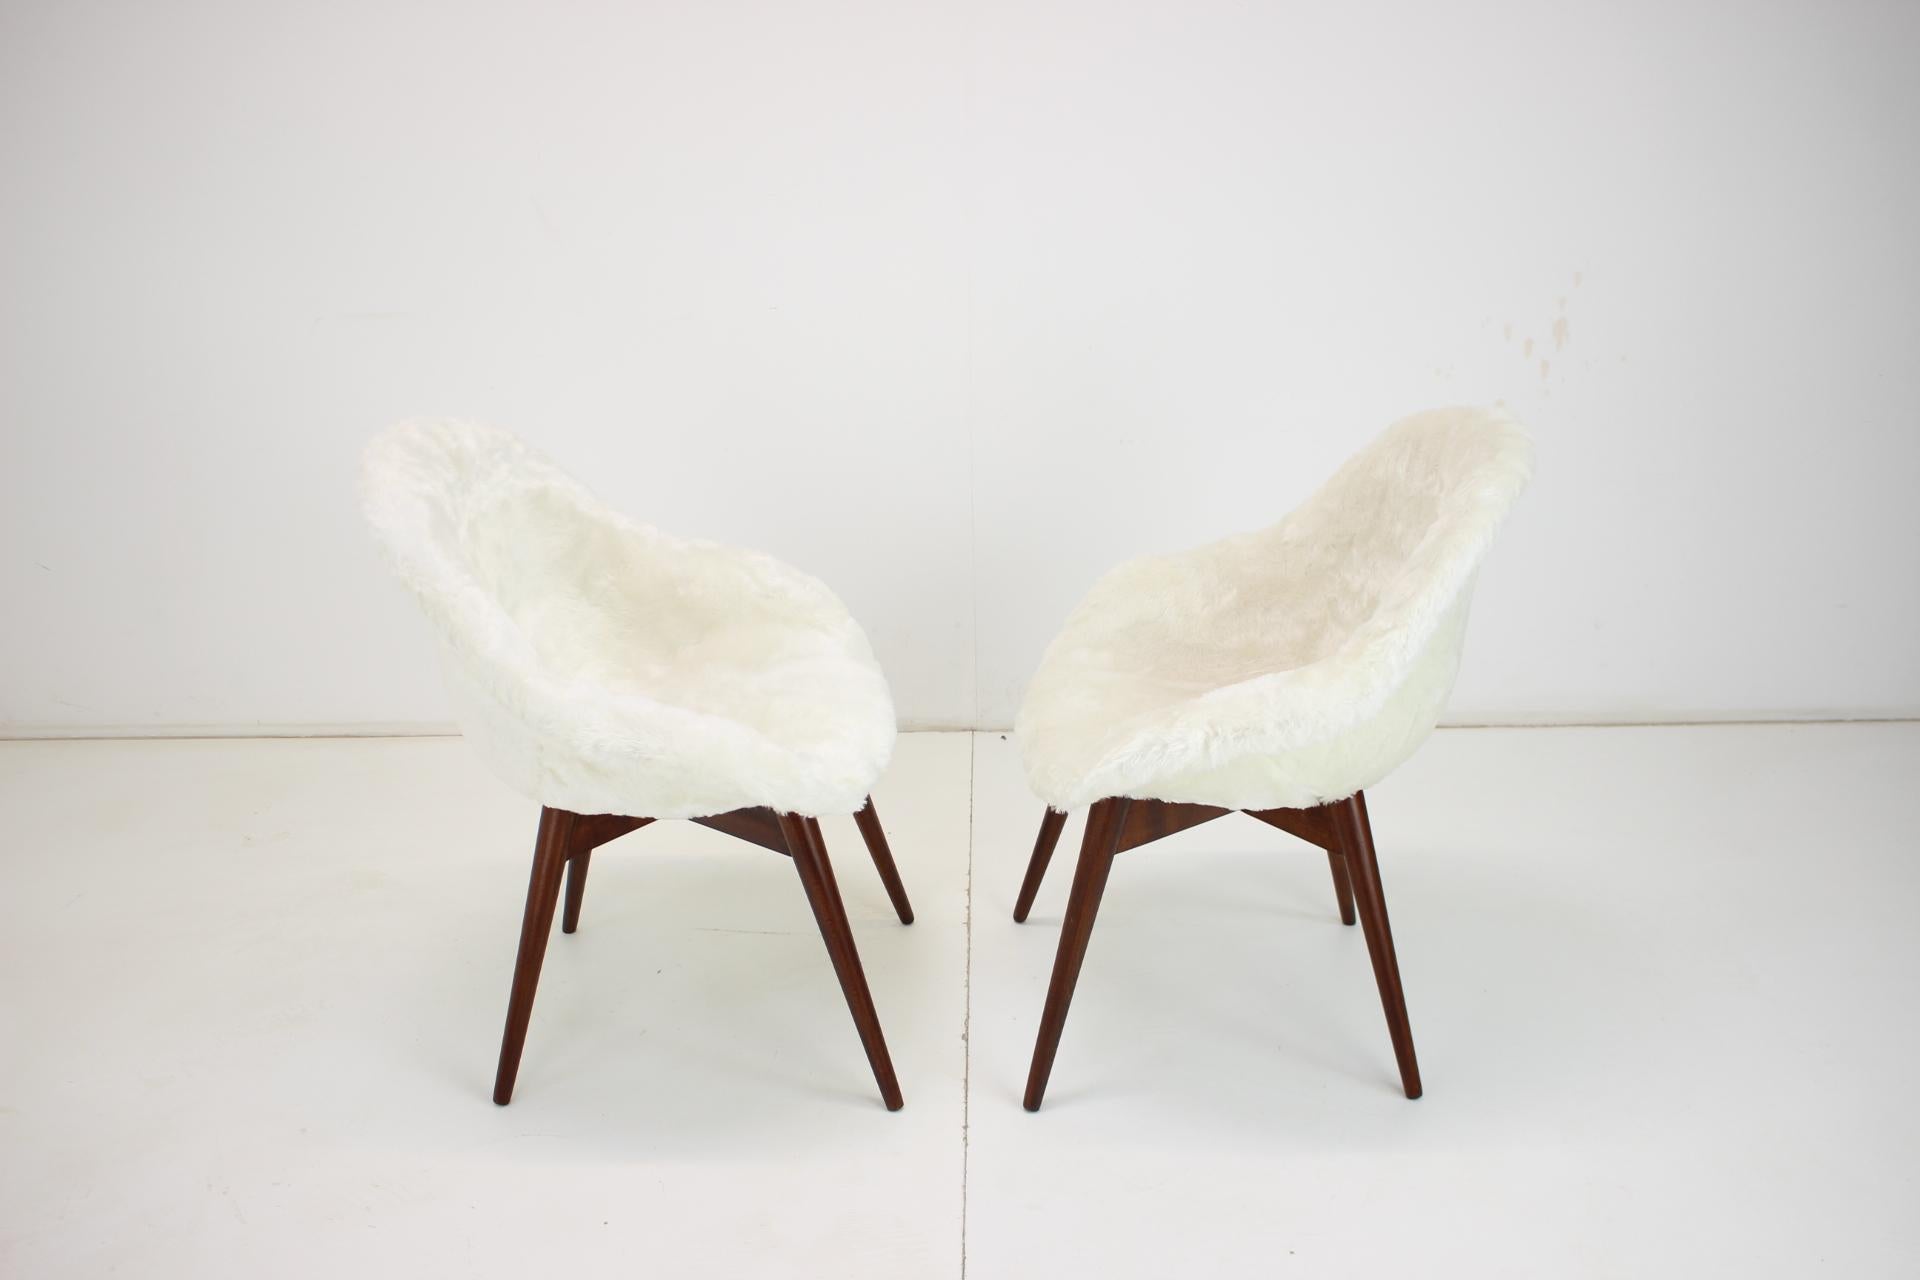 Czech Pair of Restored Lounge Chairs by Miroslav Navratil, 1960s For Sale